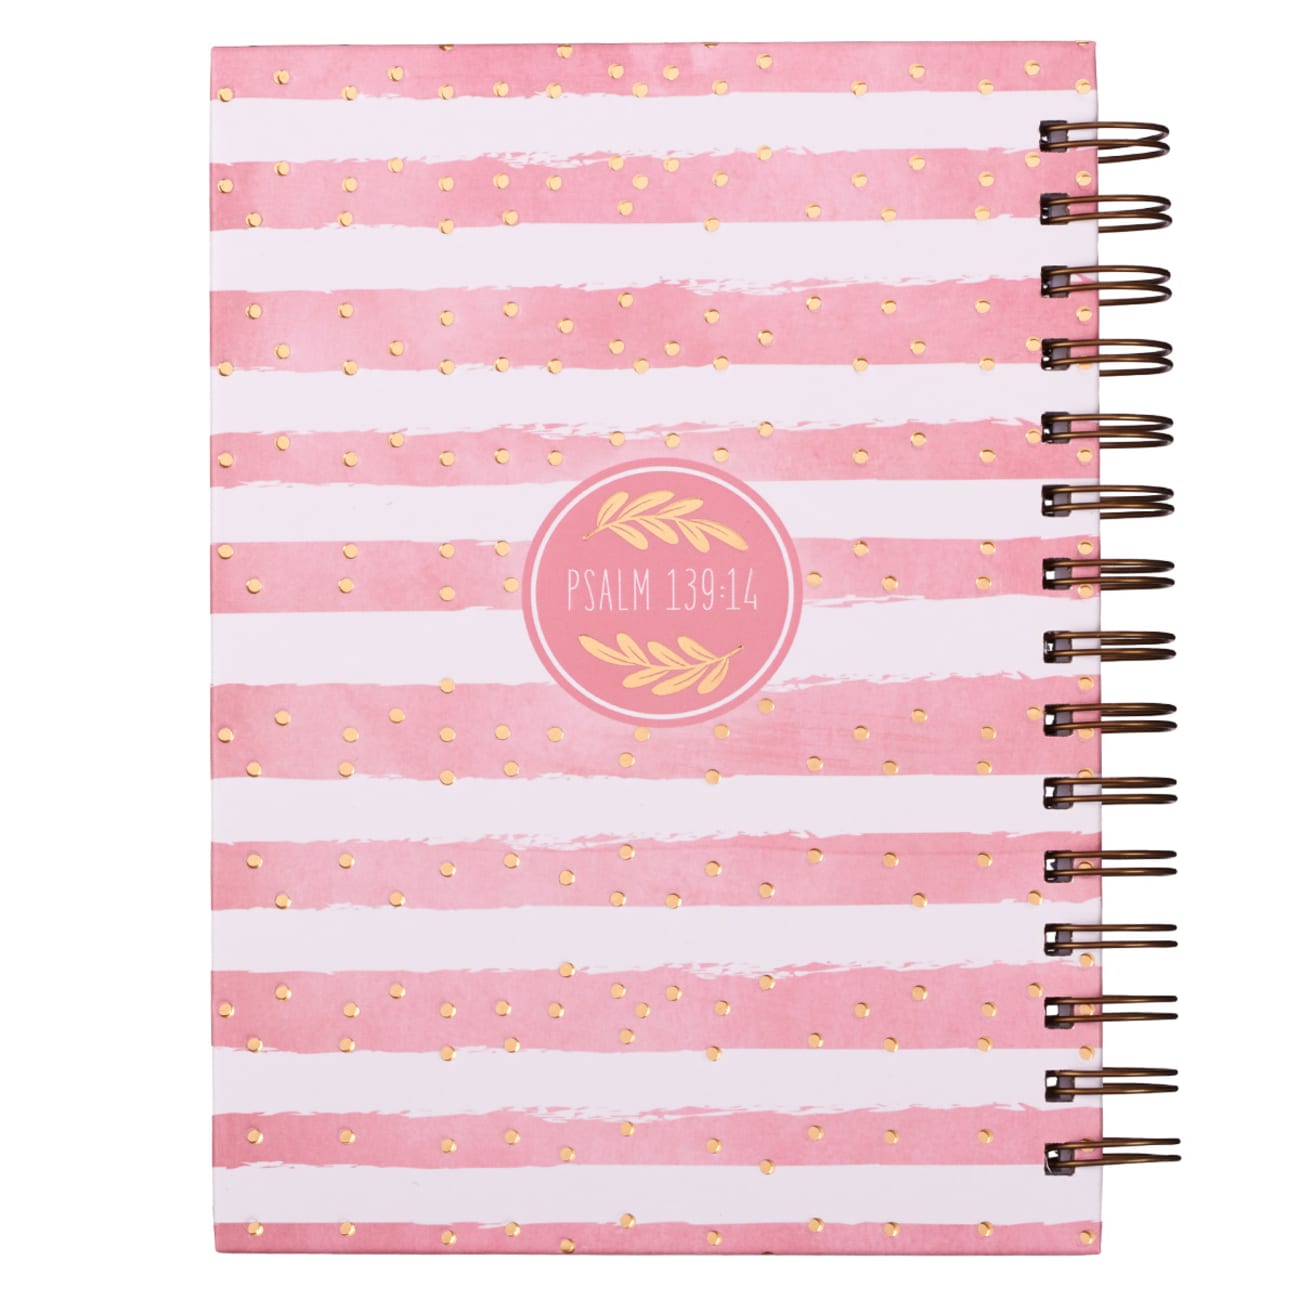 Journal: Fearfully & Wonderfully Made, Pink & White Stripes Spiral